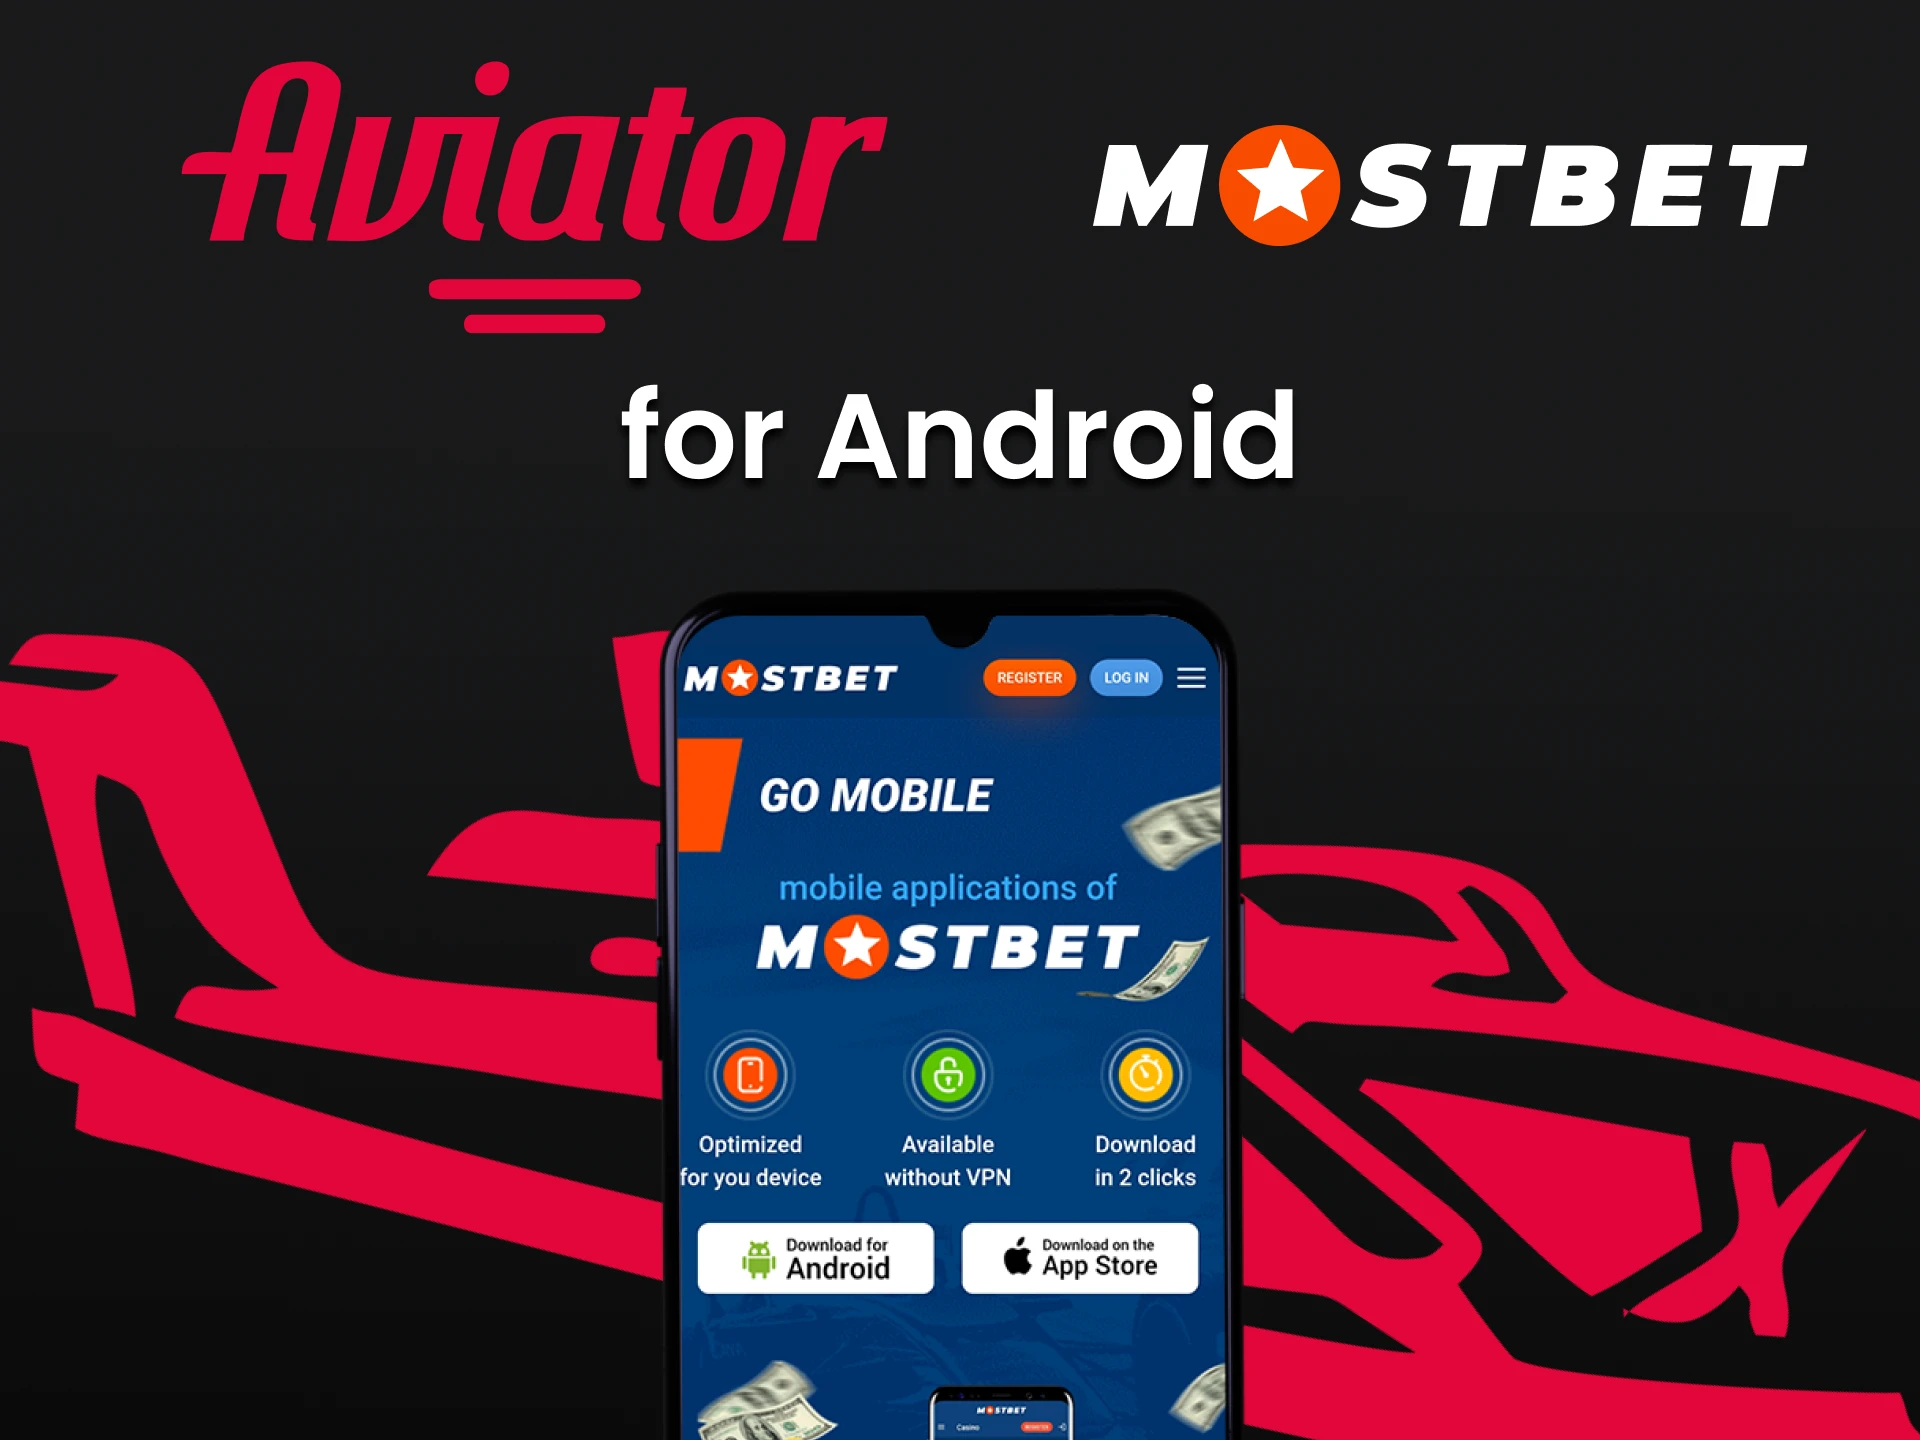 Download the Mostbet app to play Aviator.